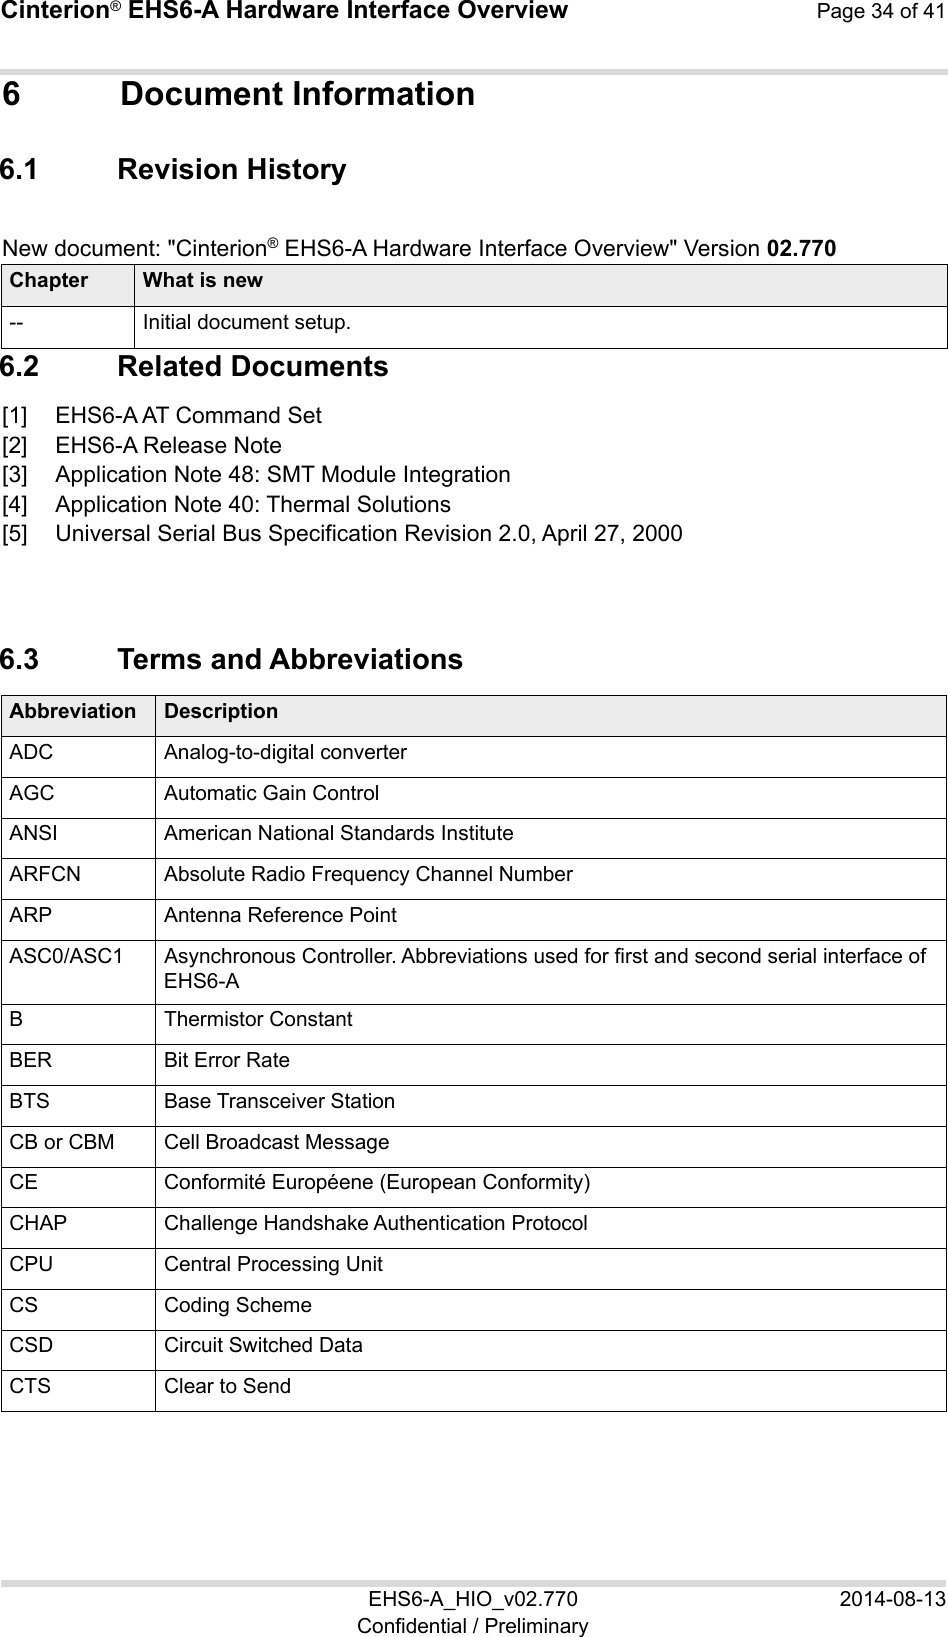 Cinterion® EHS6-A Hardware Interface Overview  Page 34 of 41 EHS6-A_HIO_v02.770  2014-08-13 Confidential / Preliminary 6  Document Information 6.1  Revision History New document: &quot;Cinterion® EHS6-A Hardware Interface Overview&quot; Version 02.770 Chapter What is new -- Initial document setup. 6.2  Related Documents [1]  EHS6-A AT Command Set [2]  EHS6-A Release Note [3]  Application Note 48: SMT Module Integration [4]  Application Note 40: Thermal Solutions [5]  Universal Serial Bus Specification Revision 2.0, April 27, 2000 6.3  Terms and Abbreviations Abbreviation Description ADC Analog-to-digital converterAGC Automatic Gain ControlANSI American National Standards InstituteARFCN Absolute Radio Frequency Channel NumberARP Antenna Reference PointASC0/ASC1 Asynchronous Controller. Abbreviations used for first and second serial interface of EHS6-A B Thermistor Constant BER Bit Error Rate BTS Base Transceiver StationCB or CBM Cell Broadcast MessageCE Conformité Européene (European Conformity)CHAP Challenge Handshake Authentication ProtocolCPU Central Processing UnitCS Coding Scheme CSD Circuit Switched Data CTS Clear to Send 